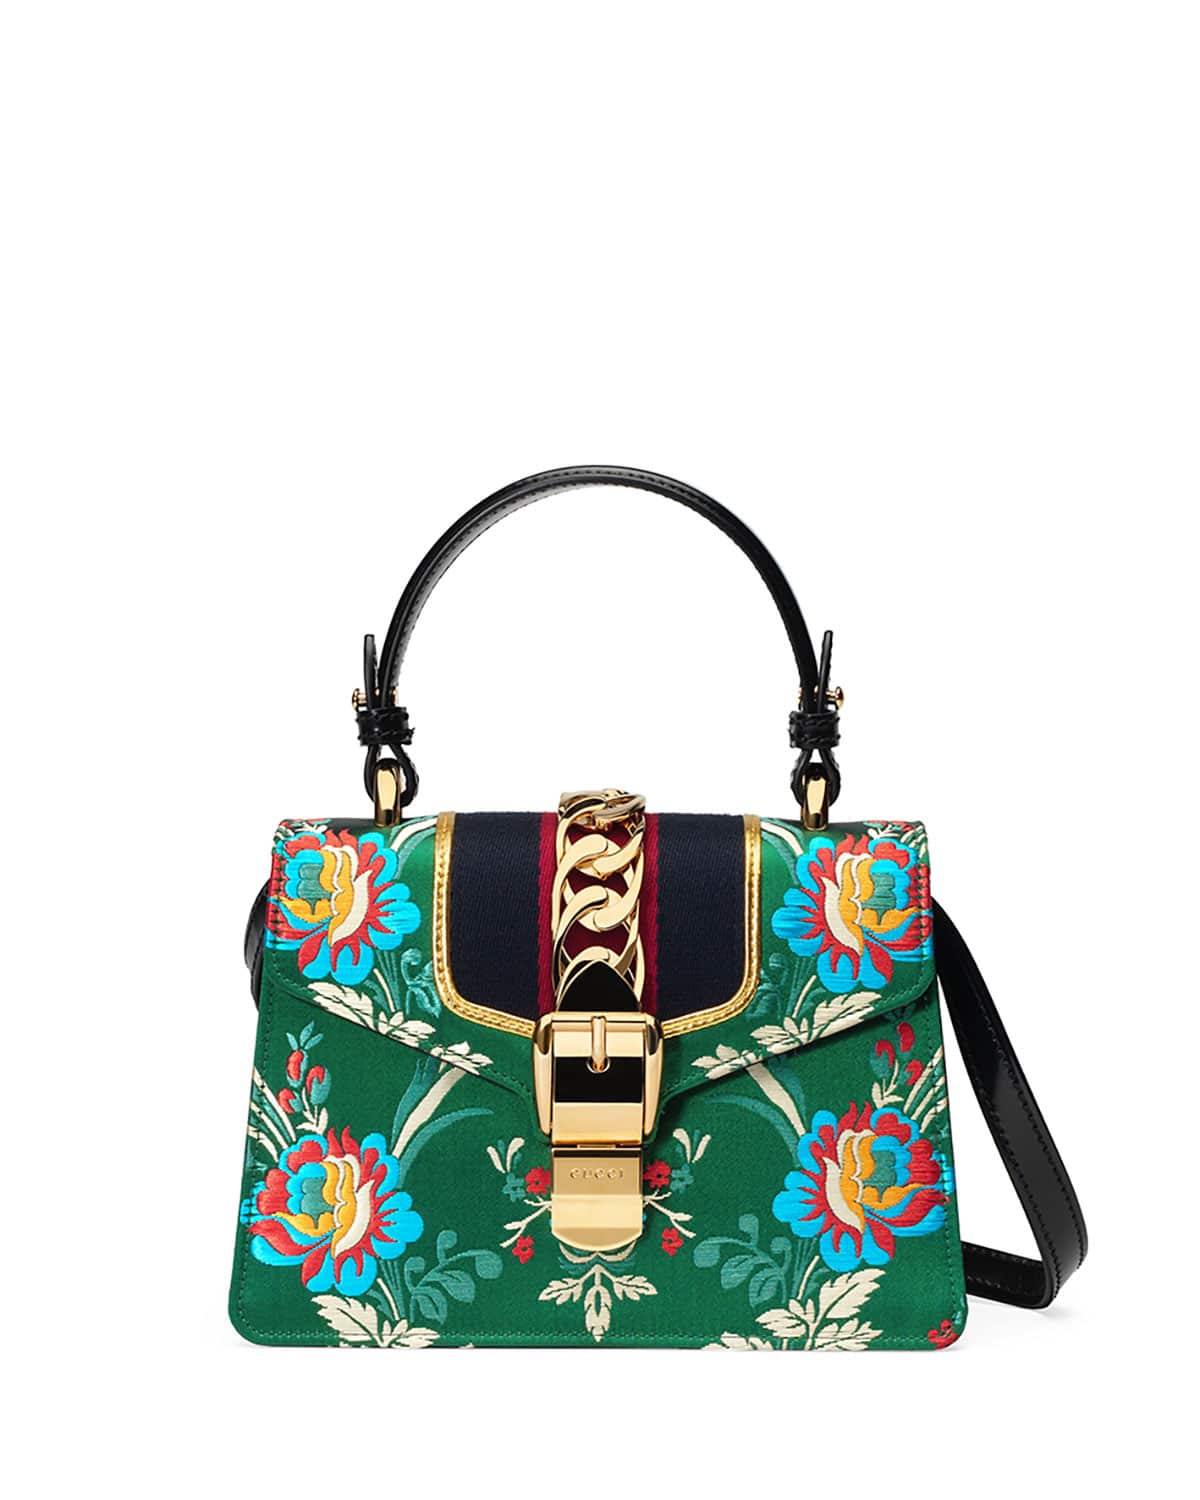 UK Gucci Bag Price List Reference Guide | Page 2 of 2 | Spotted Fashion